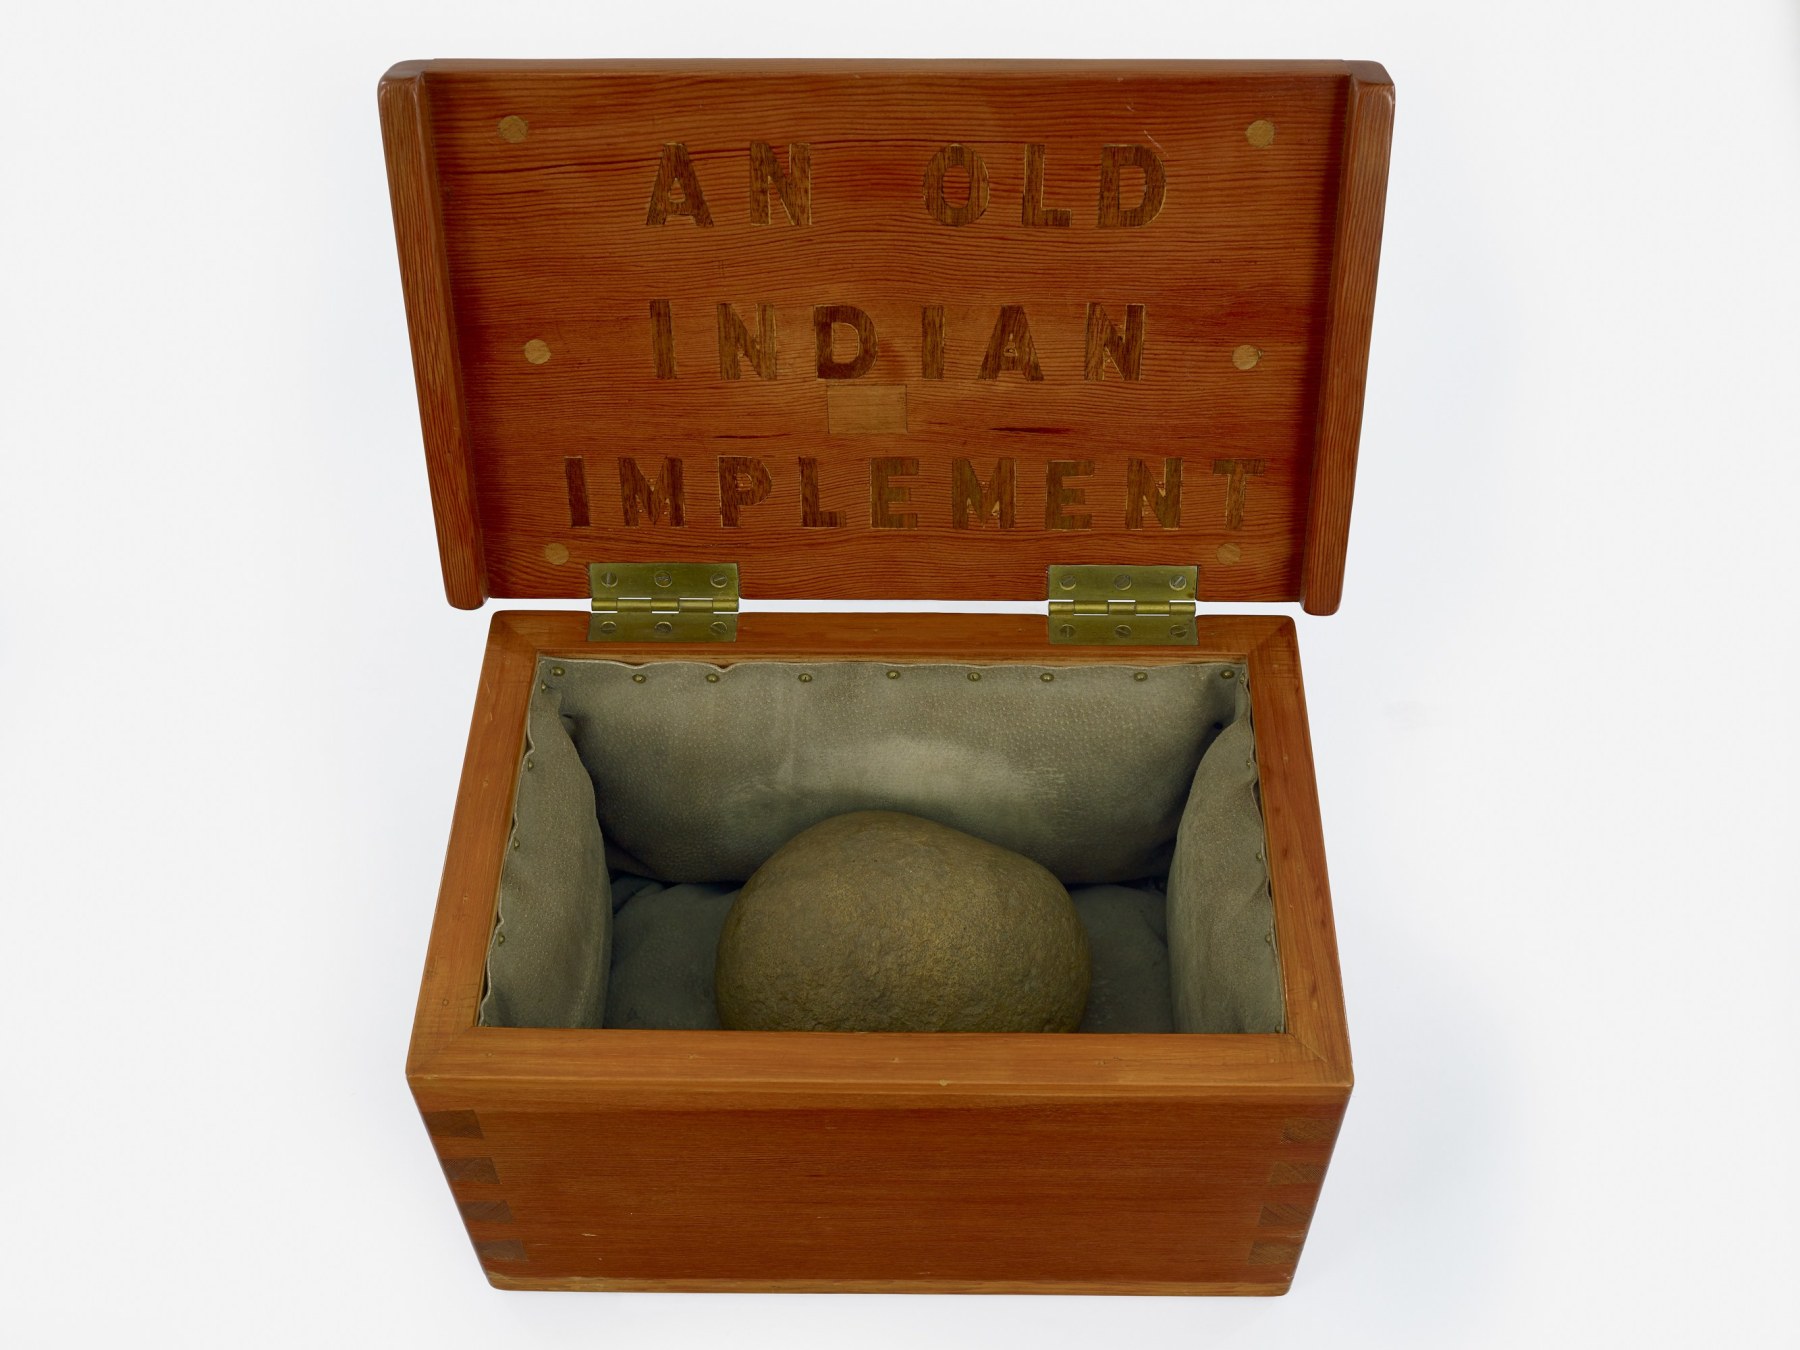 H.C. Westermann An Old Indian Implement, 1971